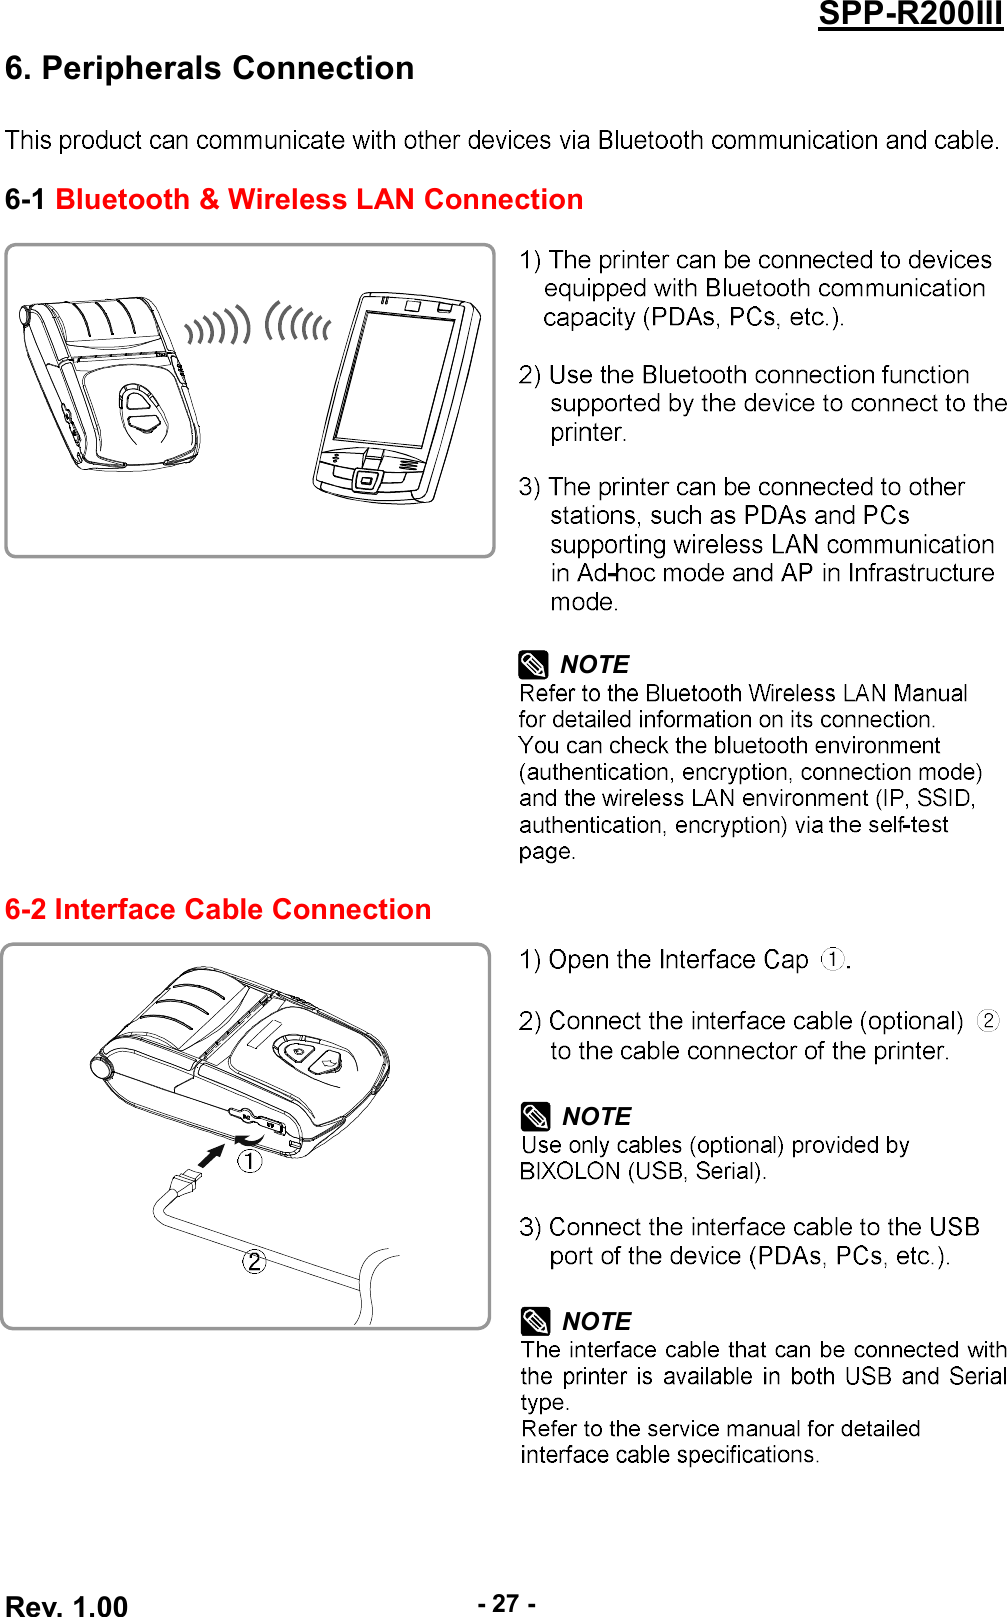 Rev. 1.00-27-SPP-R200III6. Peripherals Connection6-1 Bluetooth &amp; Wireless LAN ConnectionNOTE6-2 Interface Cable ConnectionNOTENOTE